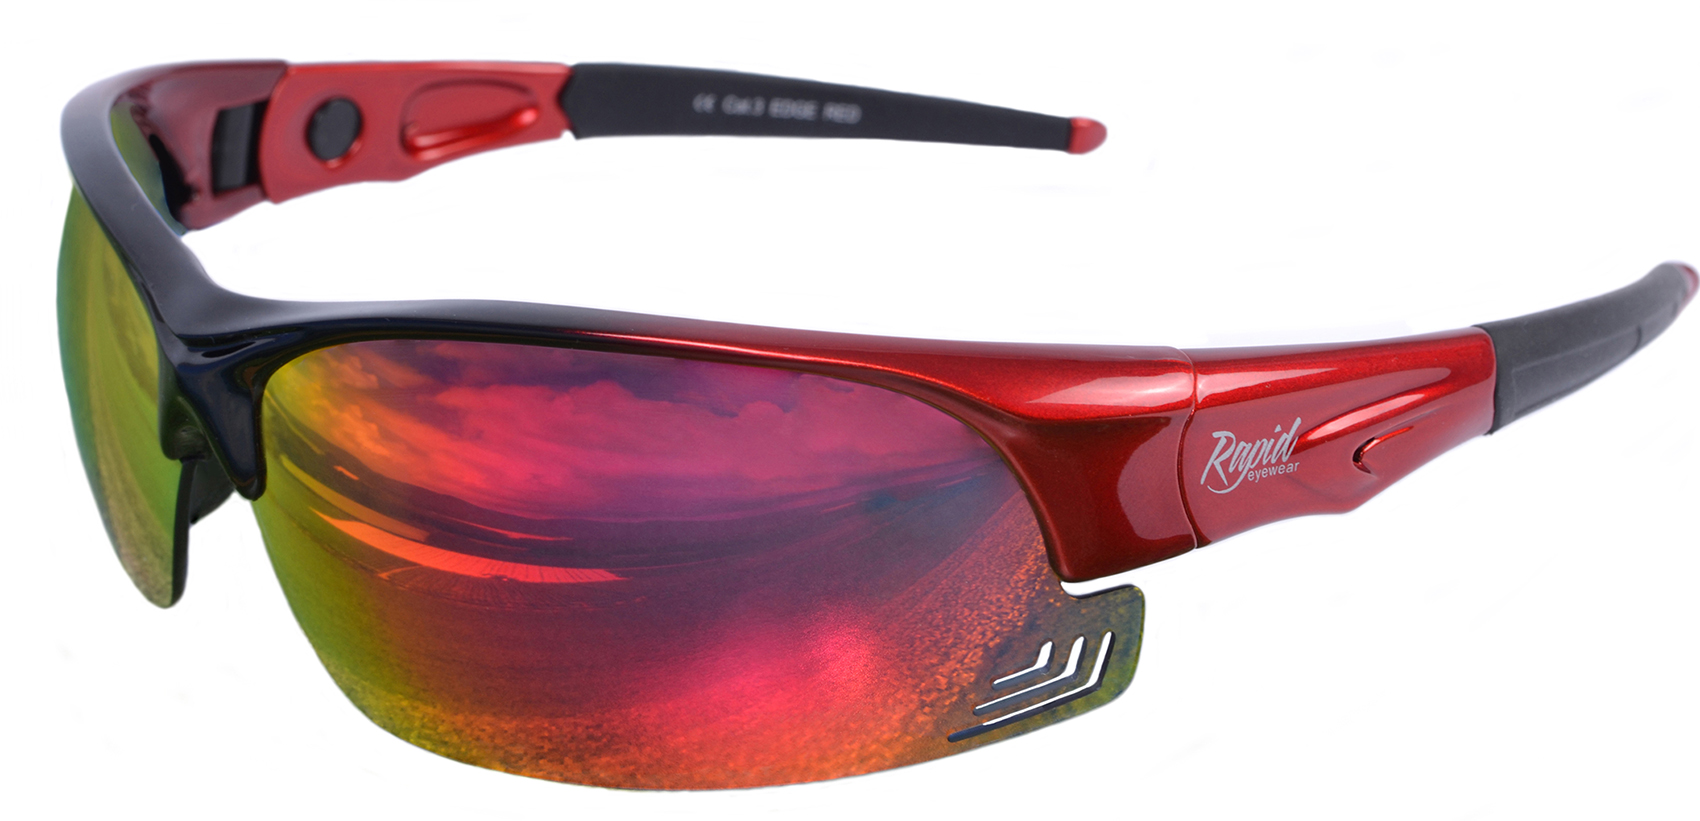 Red sunglasses for drivers